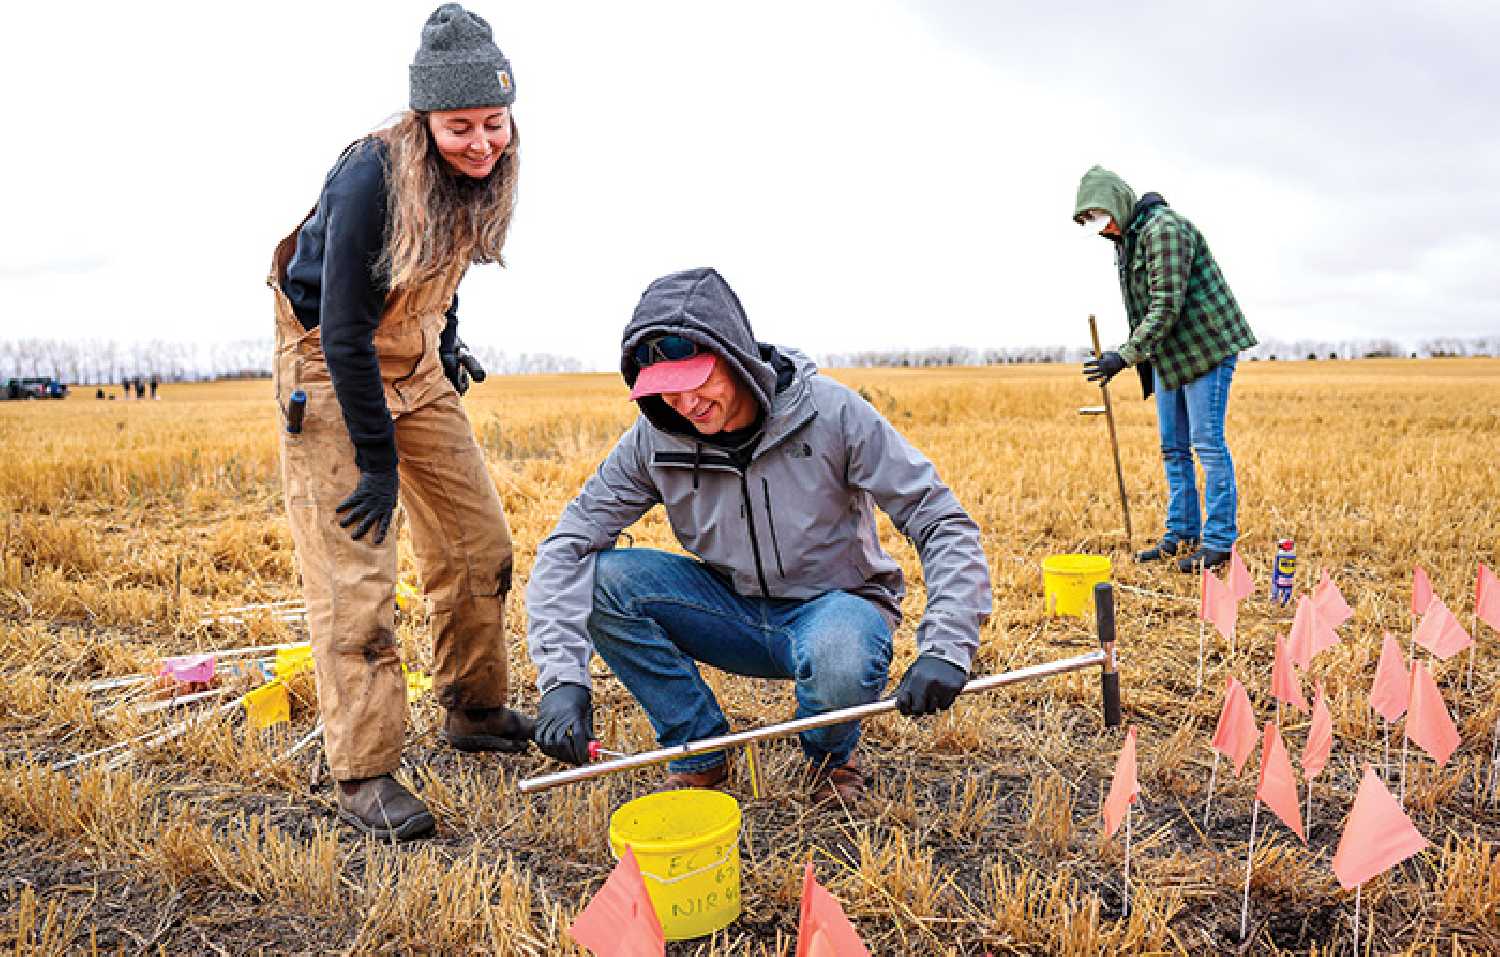 Former students from Olds College of Agriculture & Technology working on a farm as part of their program. Photo credit: Olds College.